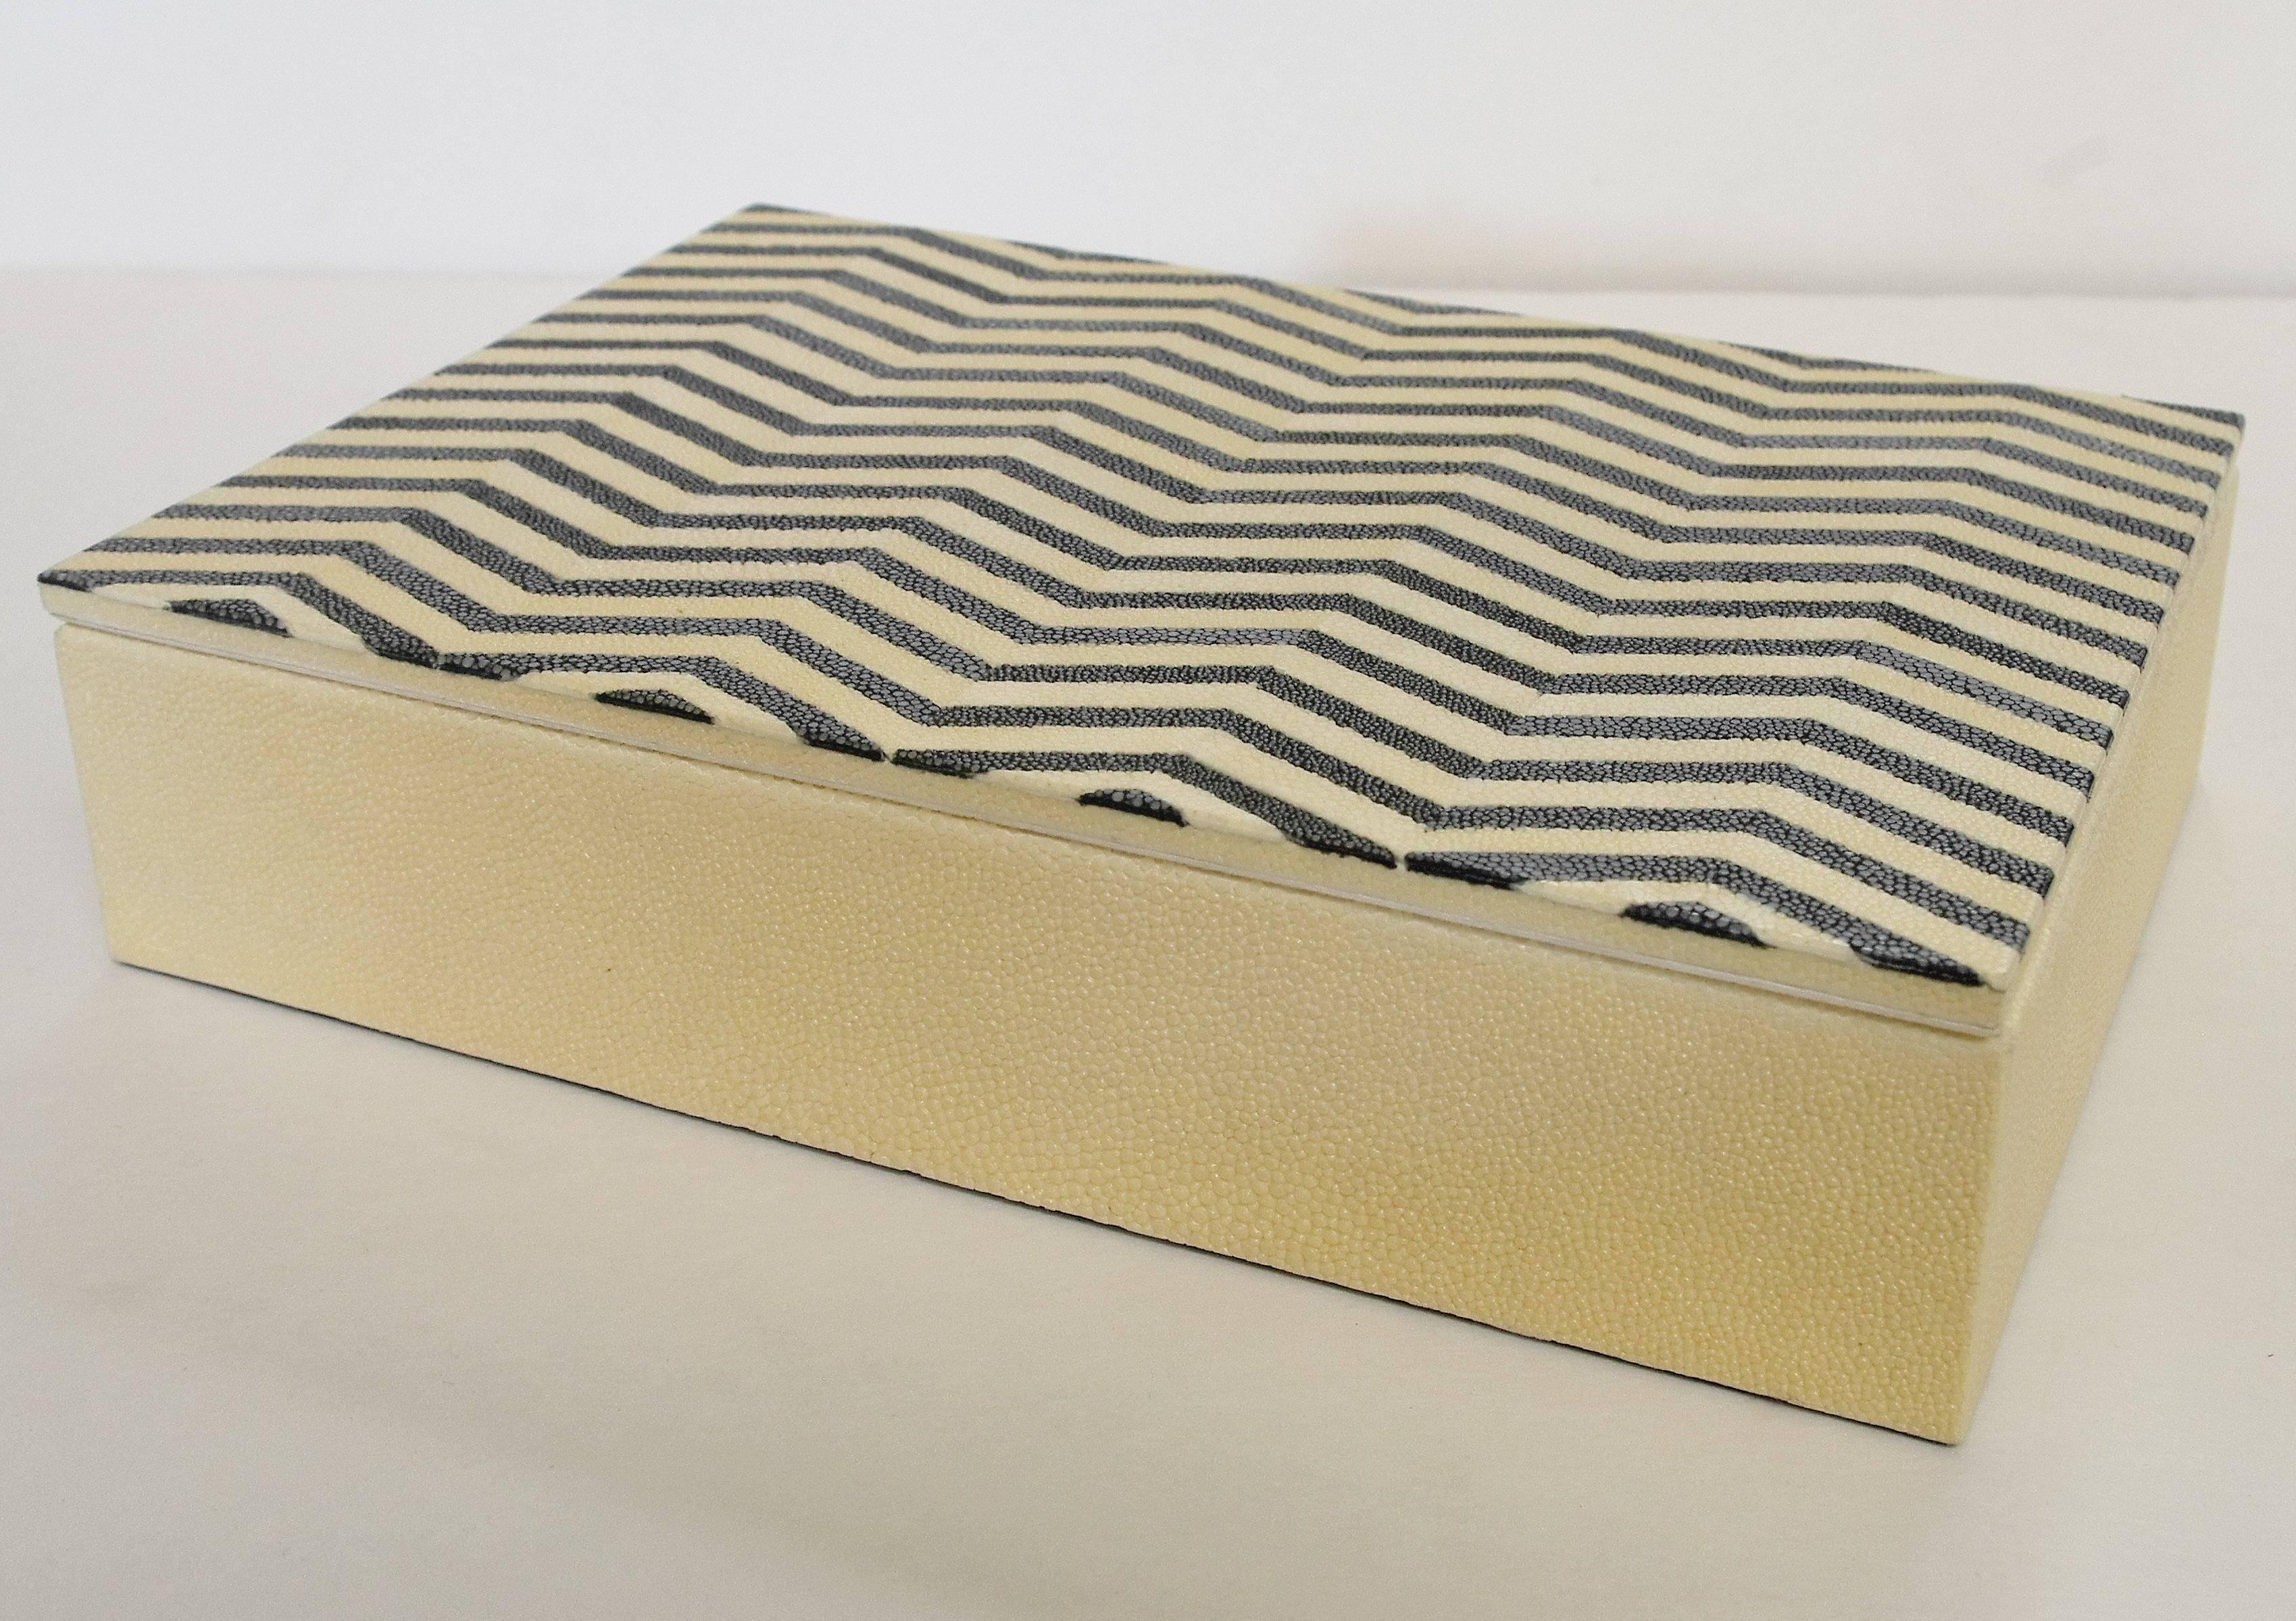 Ivory and black Shagreen box with zigzag pattern and gray suede interior 
Width: 10 inches / Depth: 7 inches / Height:  2.5 inches
1 in stock in Palm Springs ON FINAL CLEARANCE SALE for $595 !!! 
Order Reference #: FABIOLTD MR63
This piece makes for